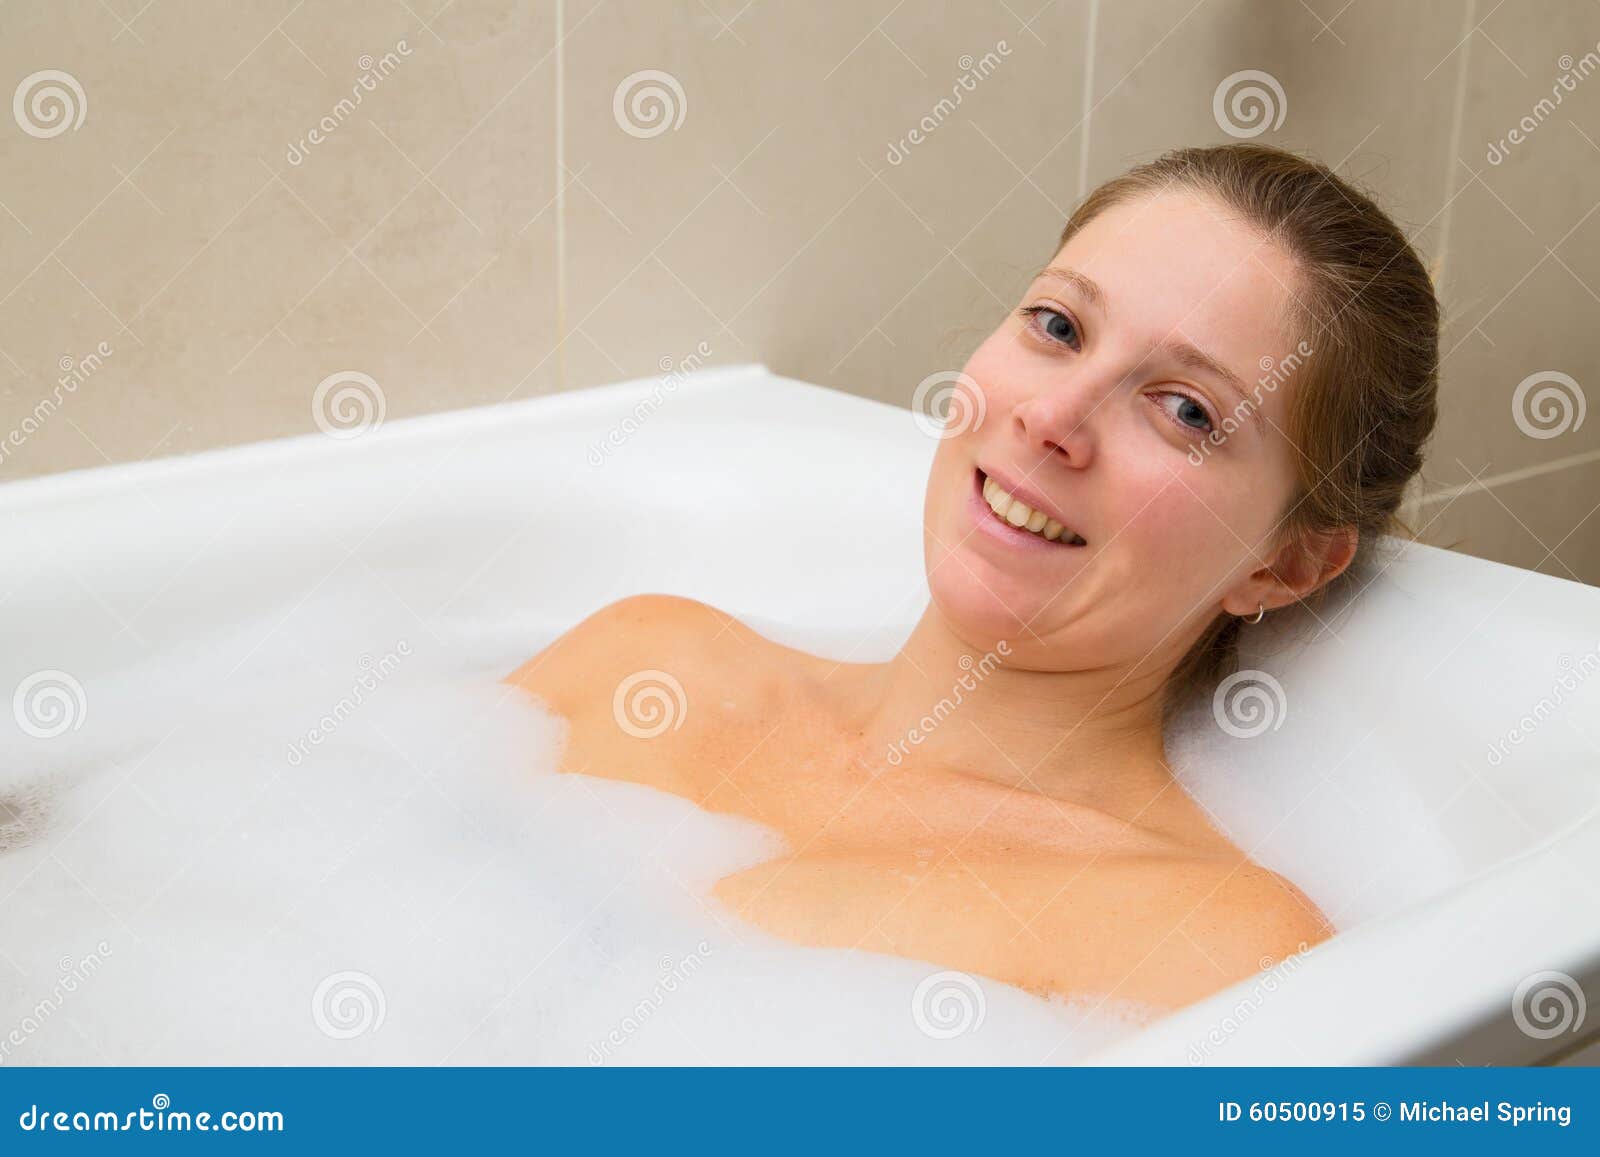 Bath Time Stock Image Image Of Home Beauty Clean Care 60500